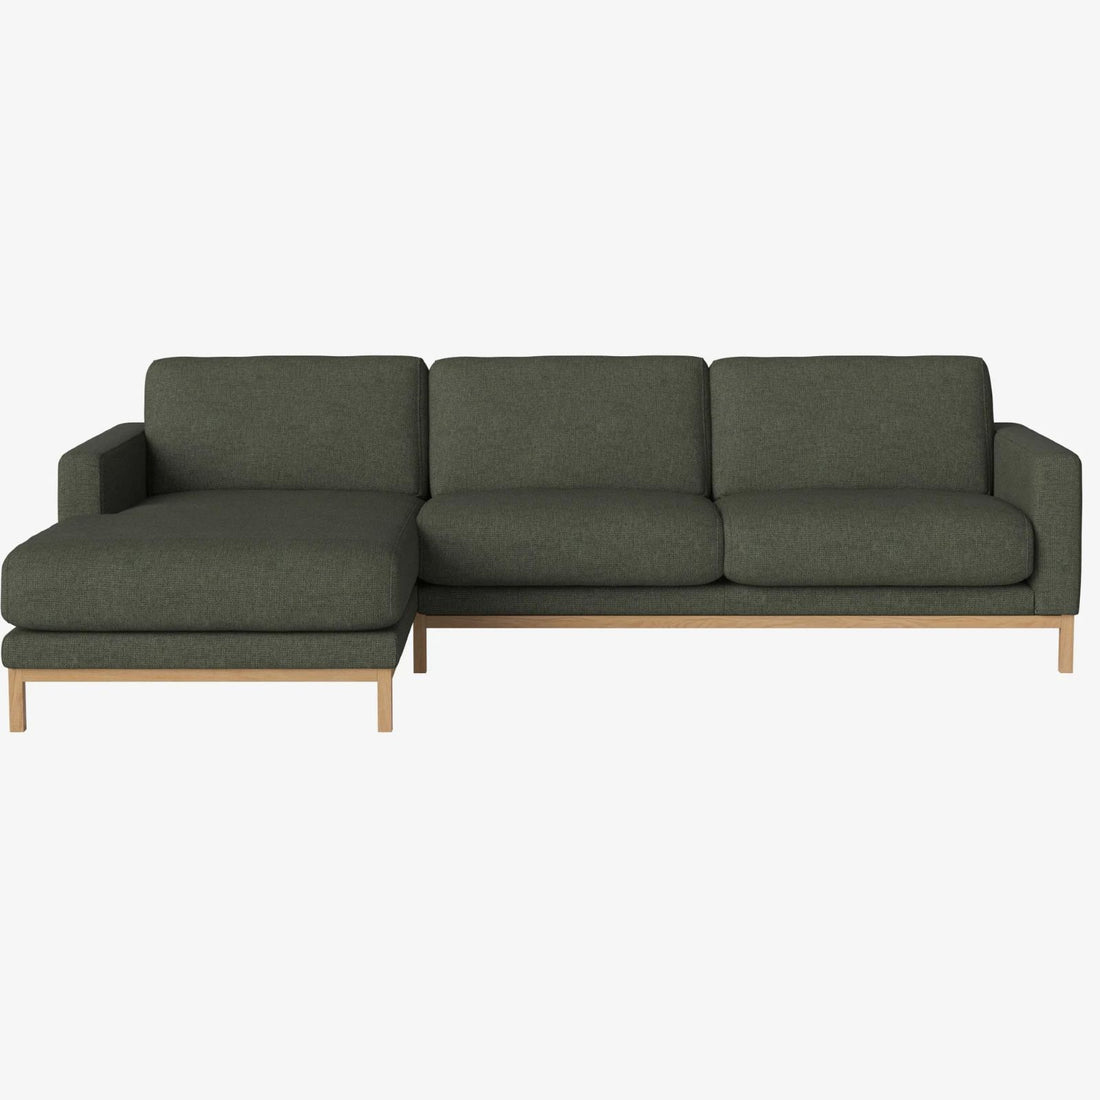 North | Sofa 3 Seater with chaise longue left